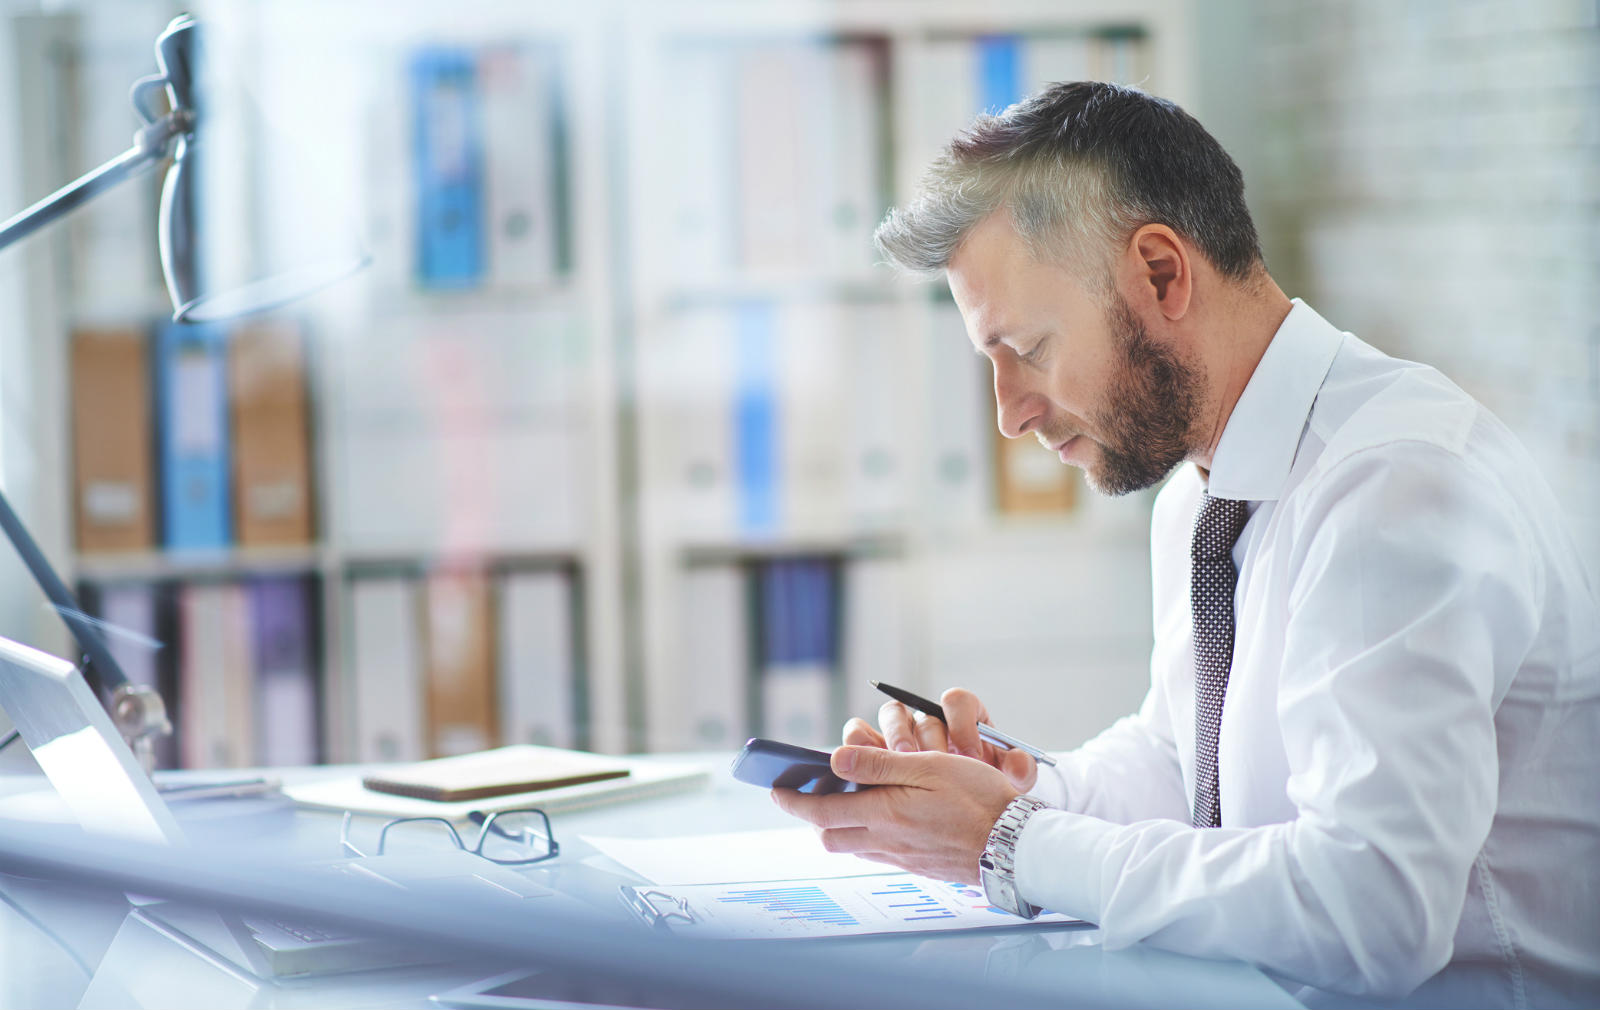 Image of office worker accessing his mobile device in office. Business Mobile Plans and Business Mobile Solutions from Columbus UK. Call 0333 240 7755 for further information.